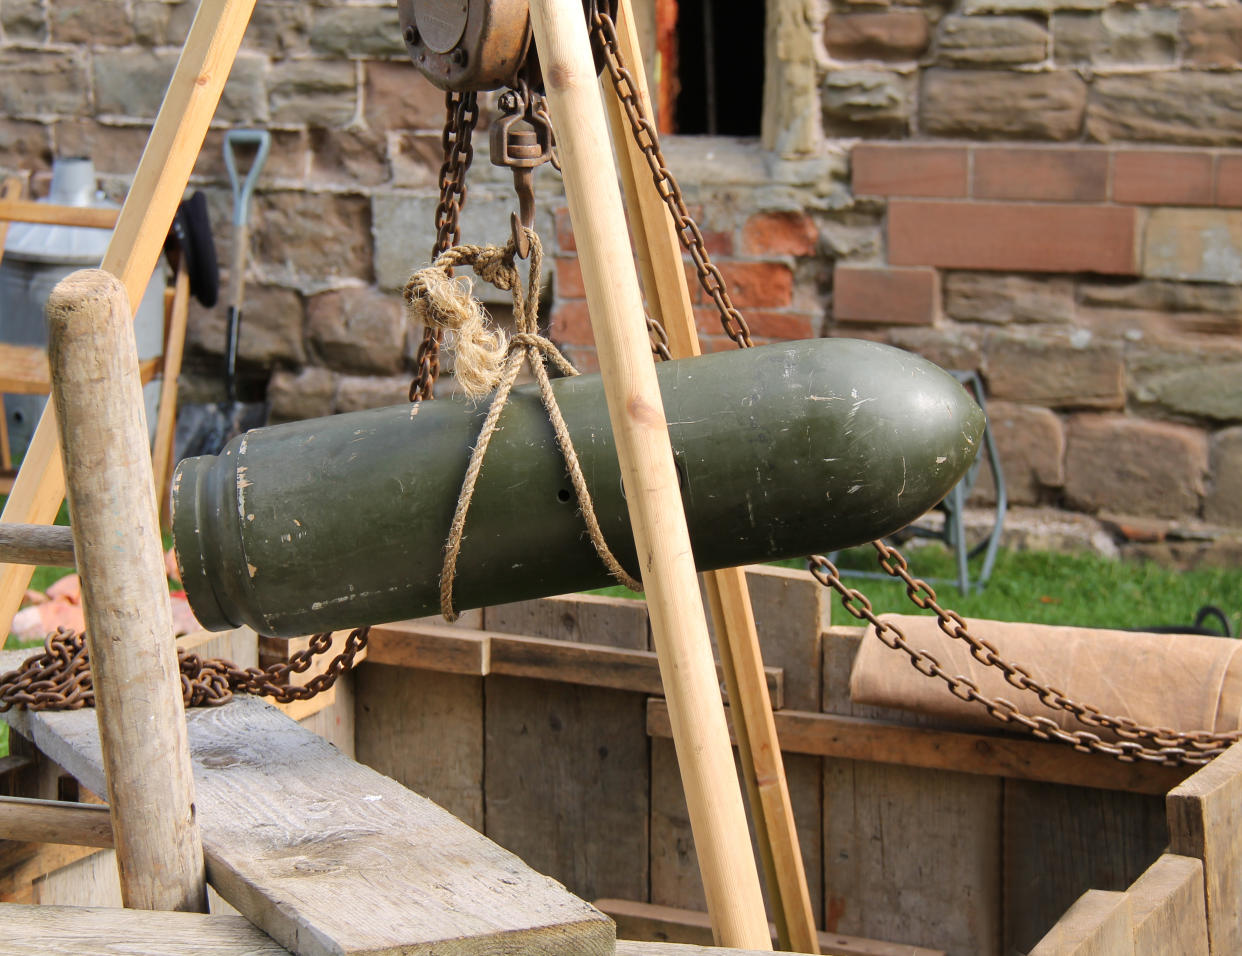 A Mock Up of Lifting an Unexploded Wartime Bomb.